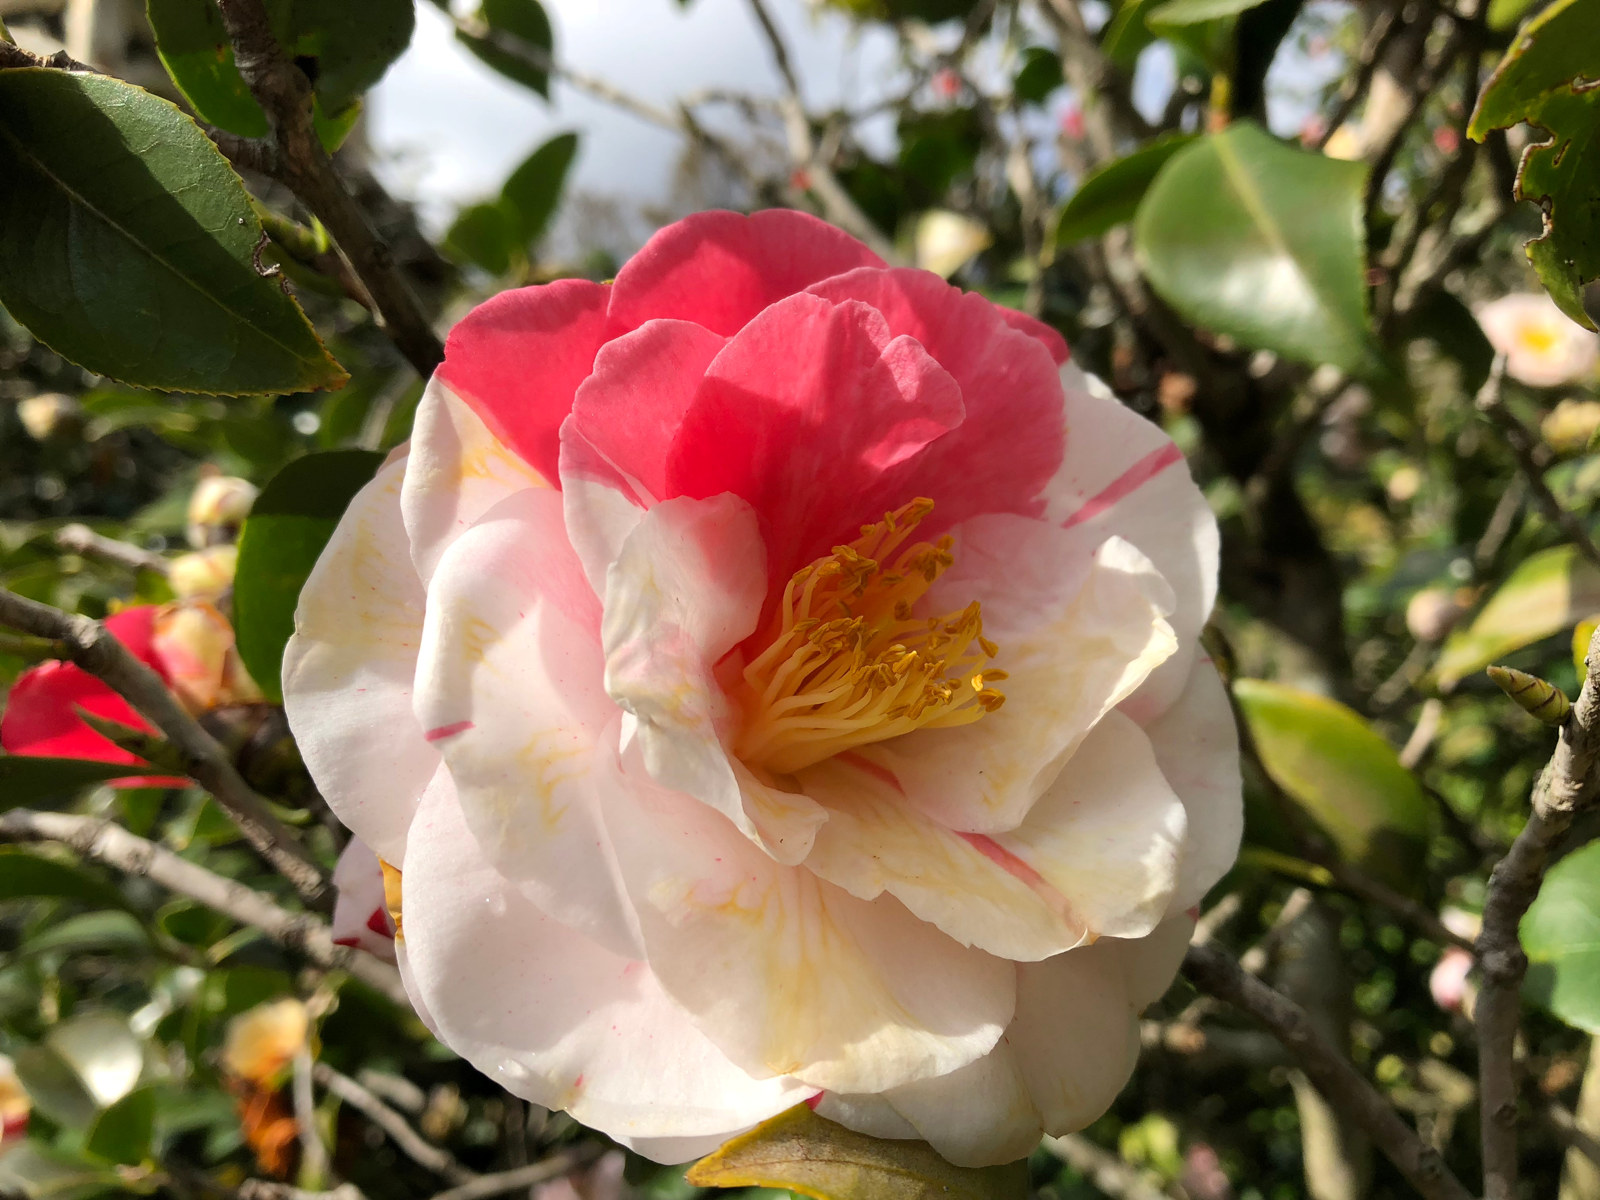 The interesting coloring of white and pink from the camellia 'Jean Lyne' flower At Vaucluse House.